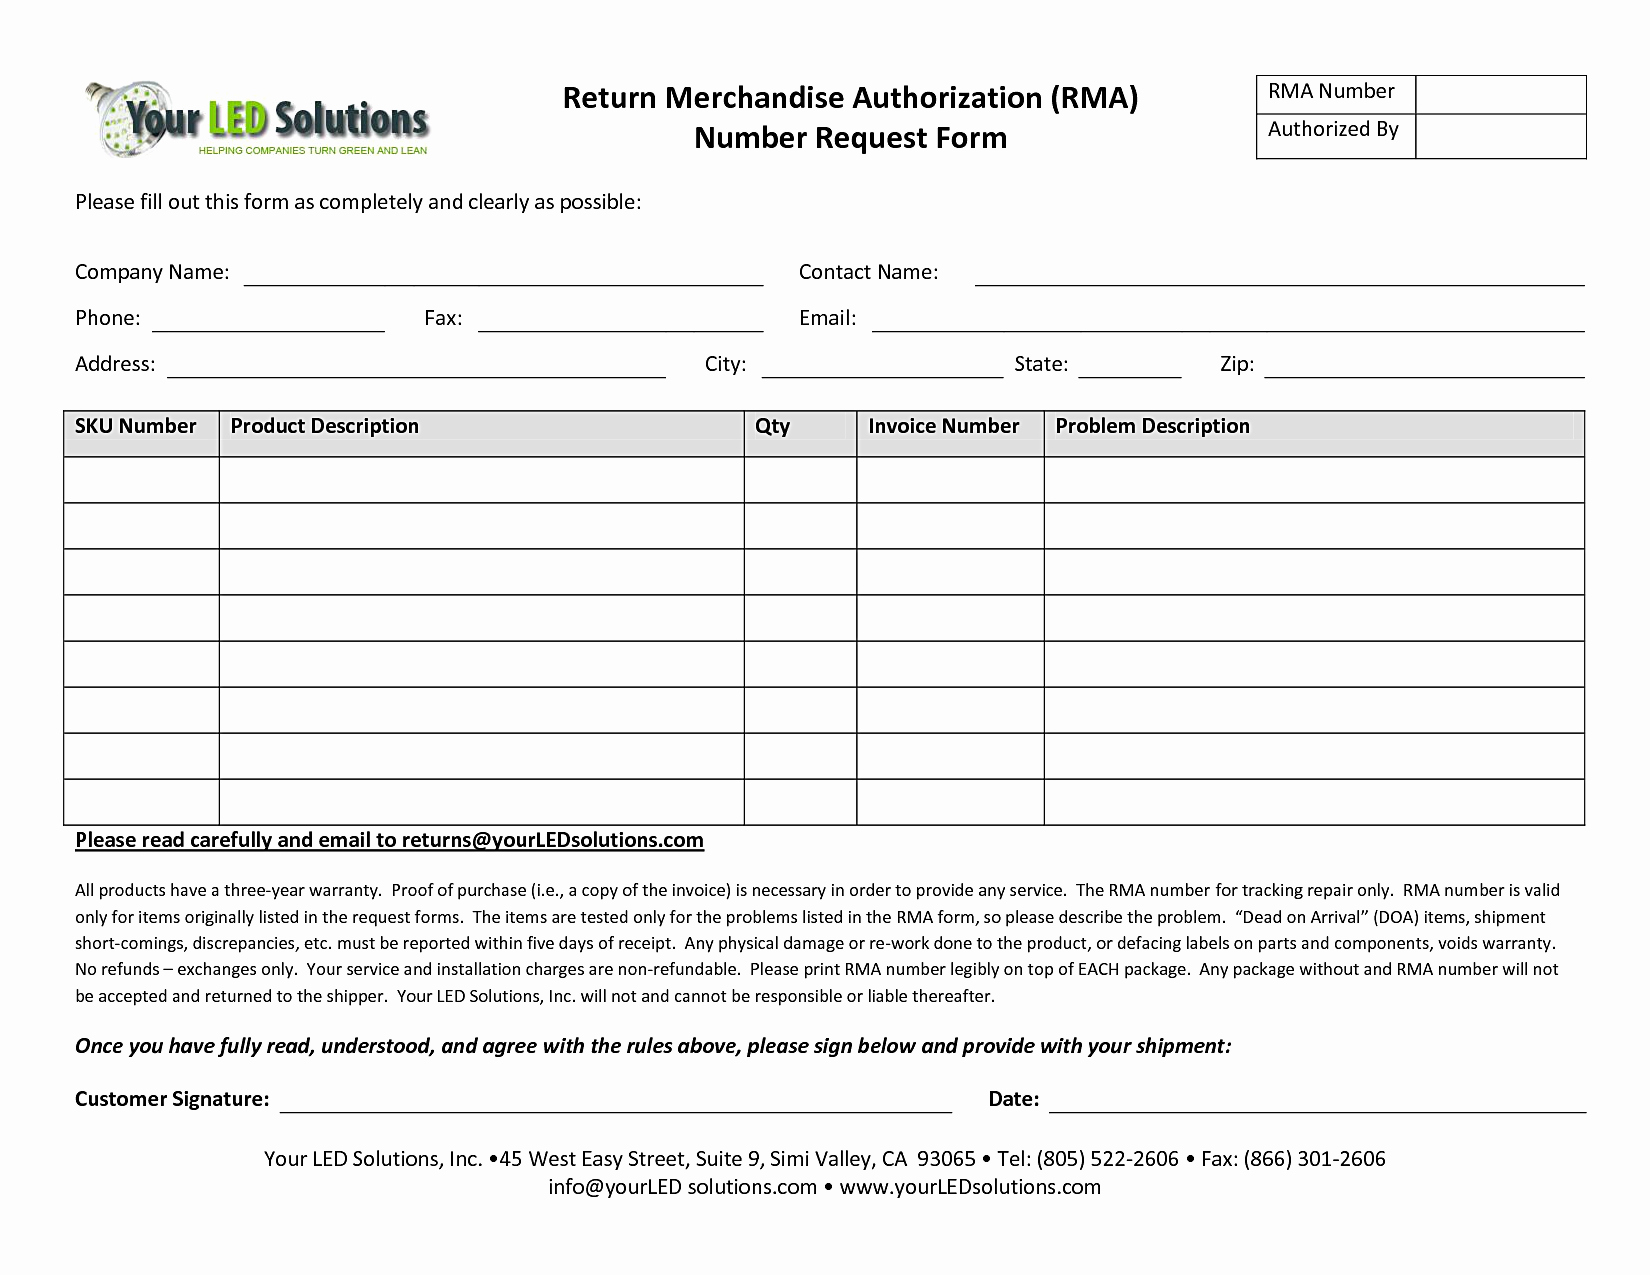 Return Authorization form Template Awesome 24 Of Return Merchandise Authorization form